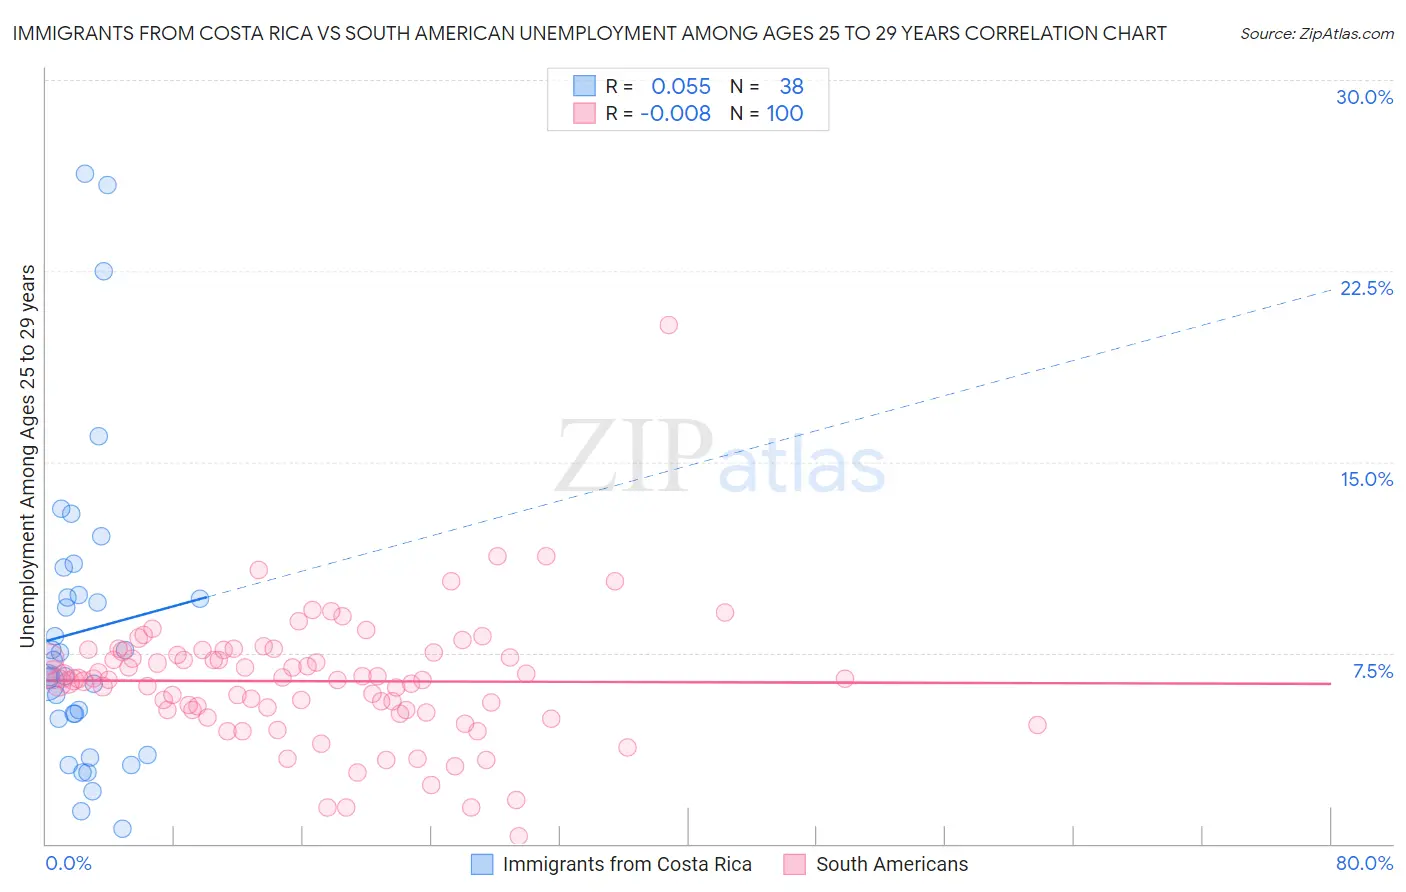 Immigrants from Costa Rica vs South American Unemployment Among Ages 25 to 29 years